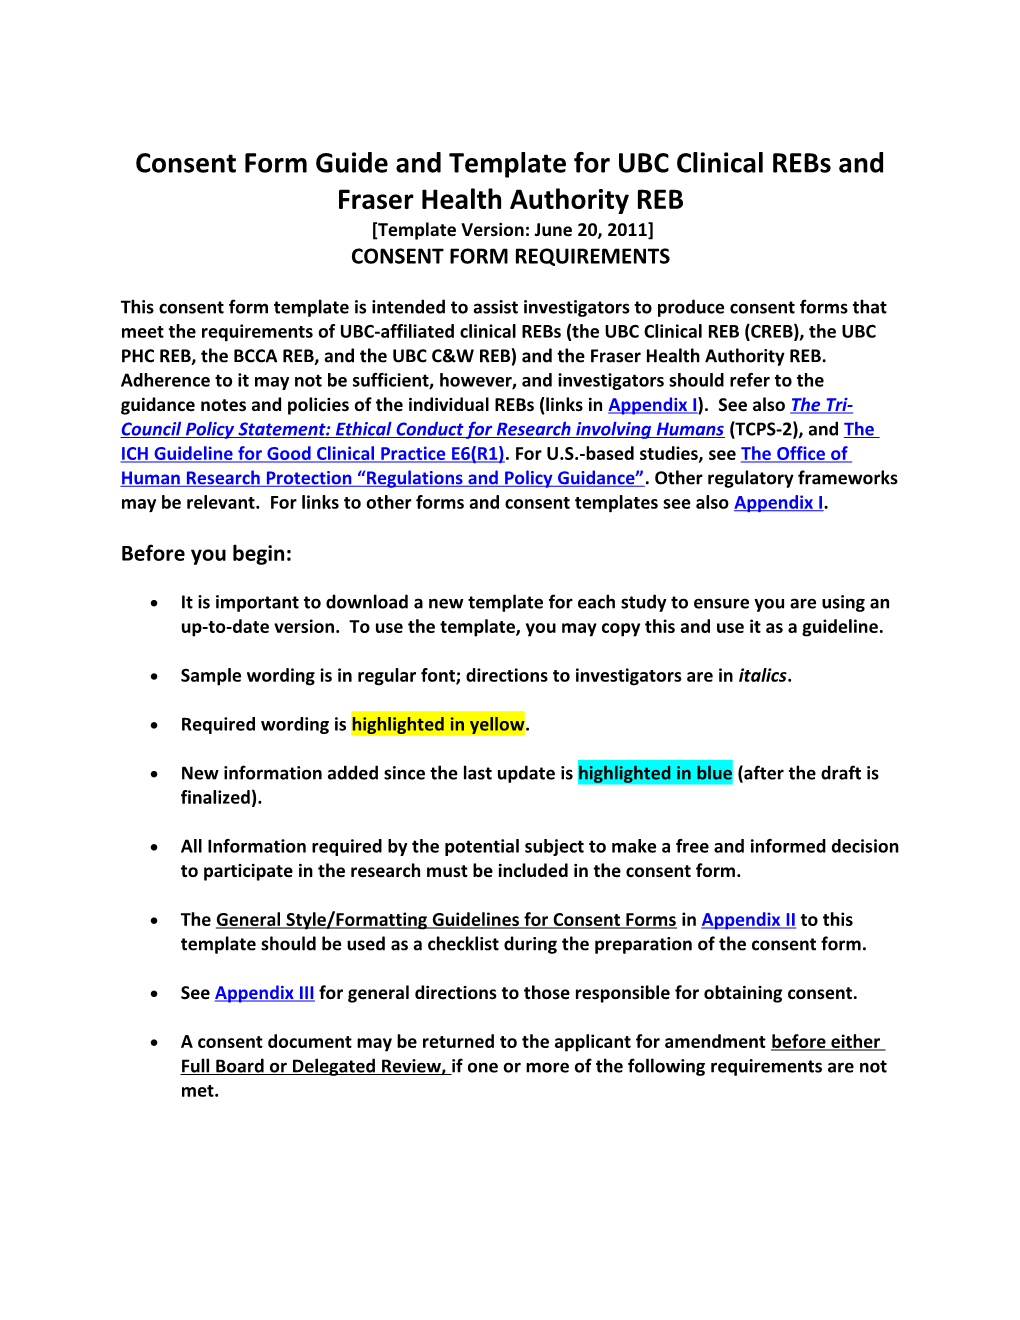 Consent Form Template Version June 20, 2011 (UBC-Affiliated Rebs and FHA REB) 1